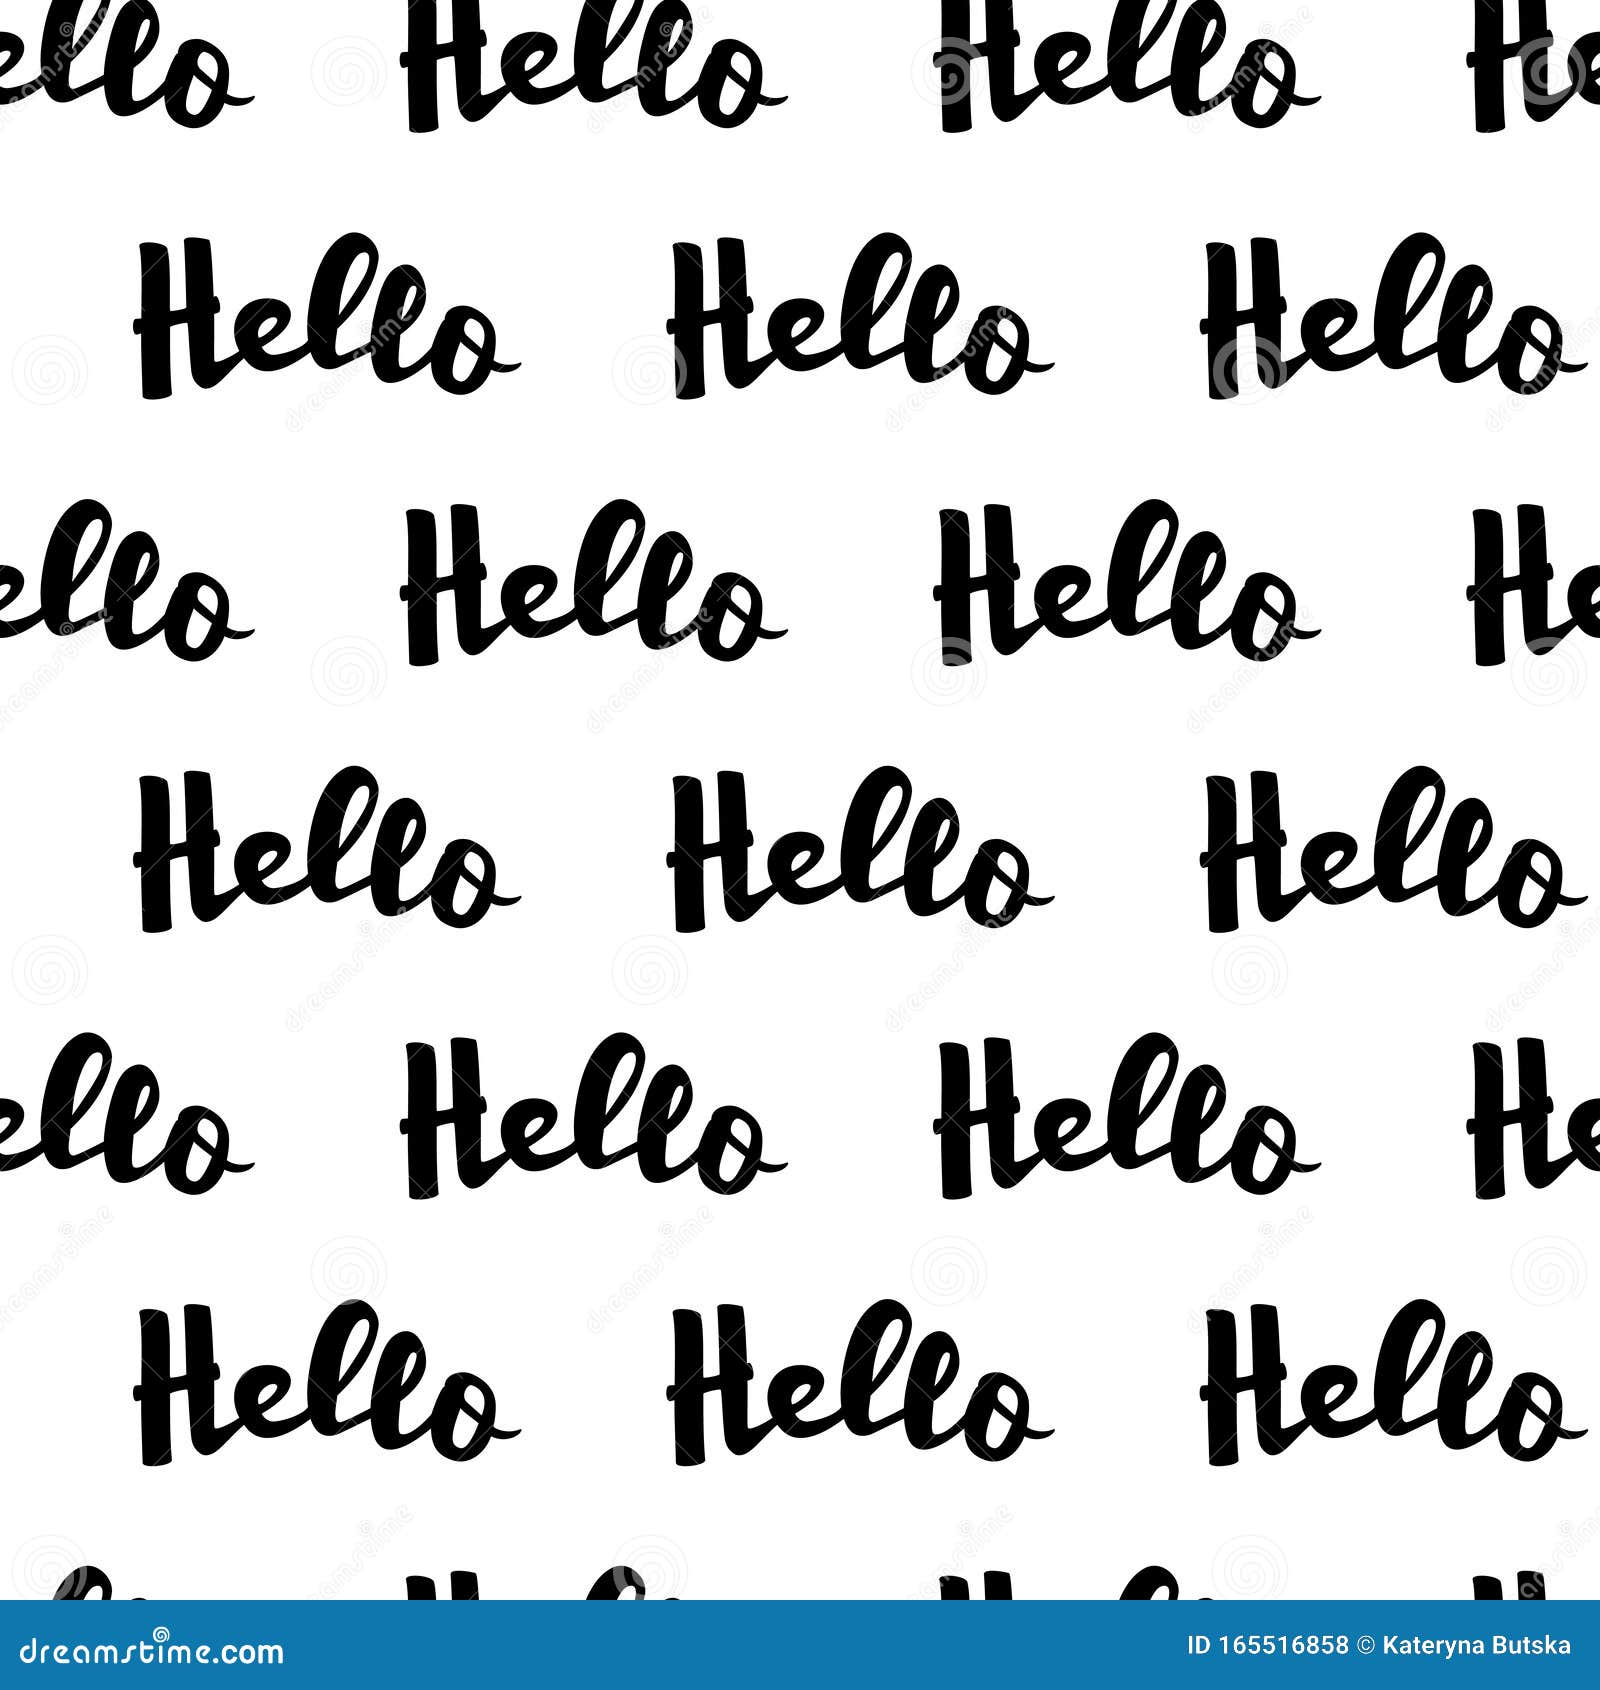 Hello PNG Image - PurePNG | Free transparent CC0 PNG Image Library